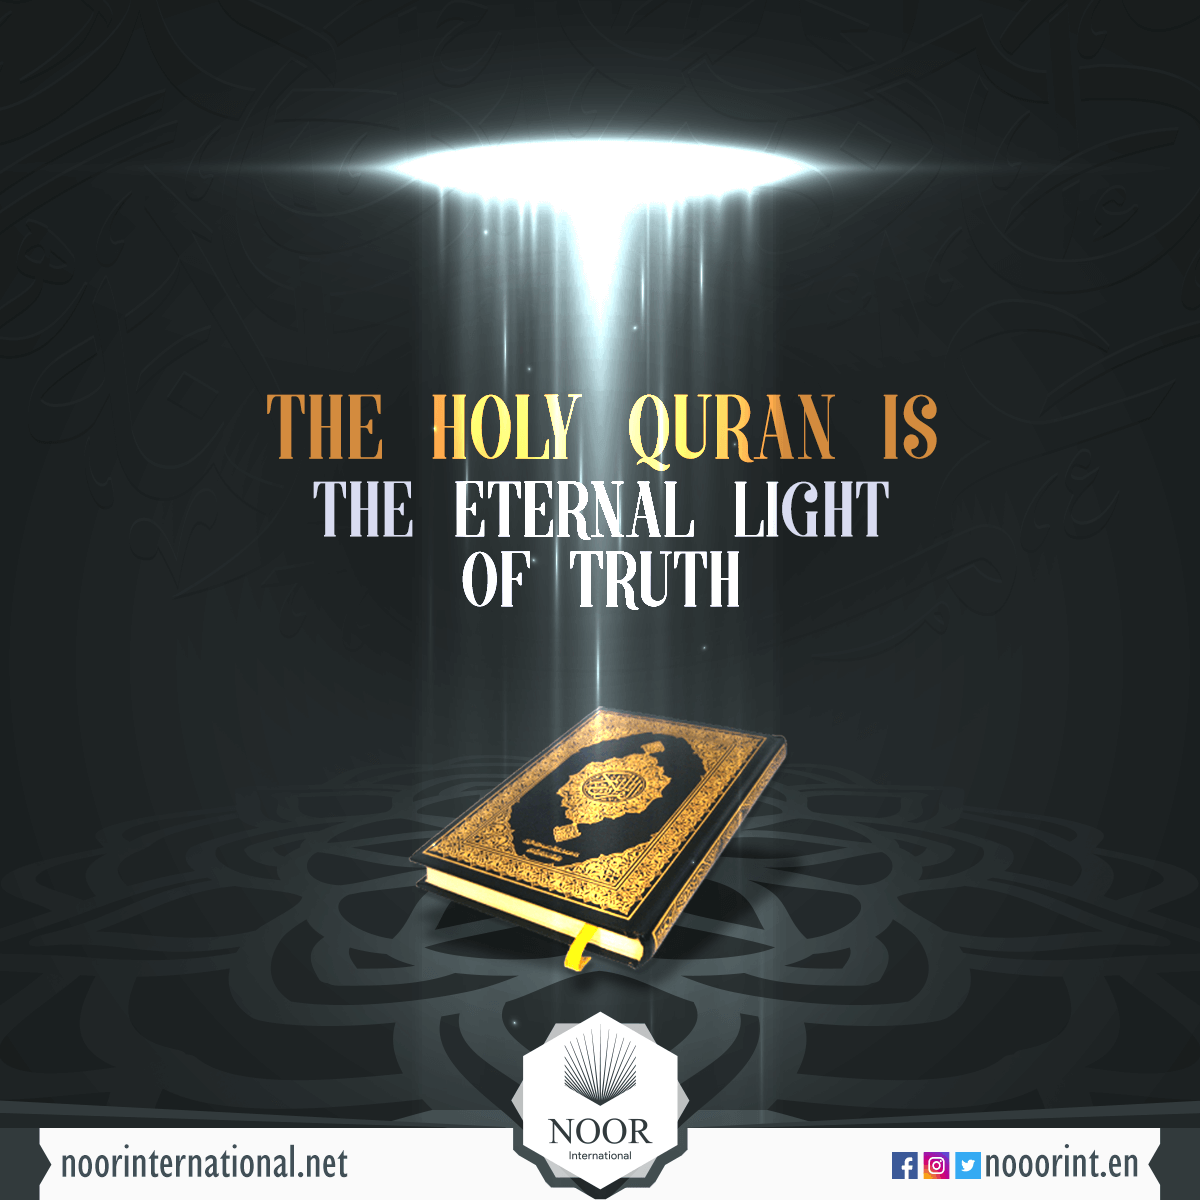 What they said about the Qur'an